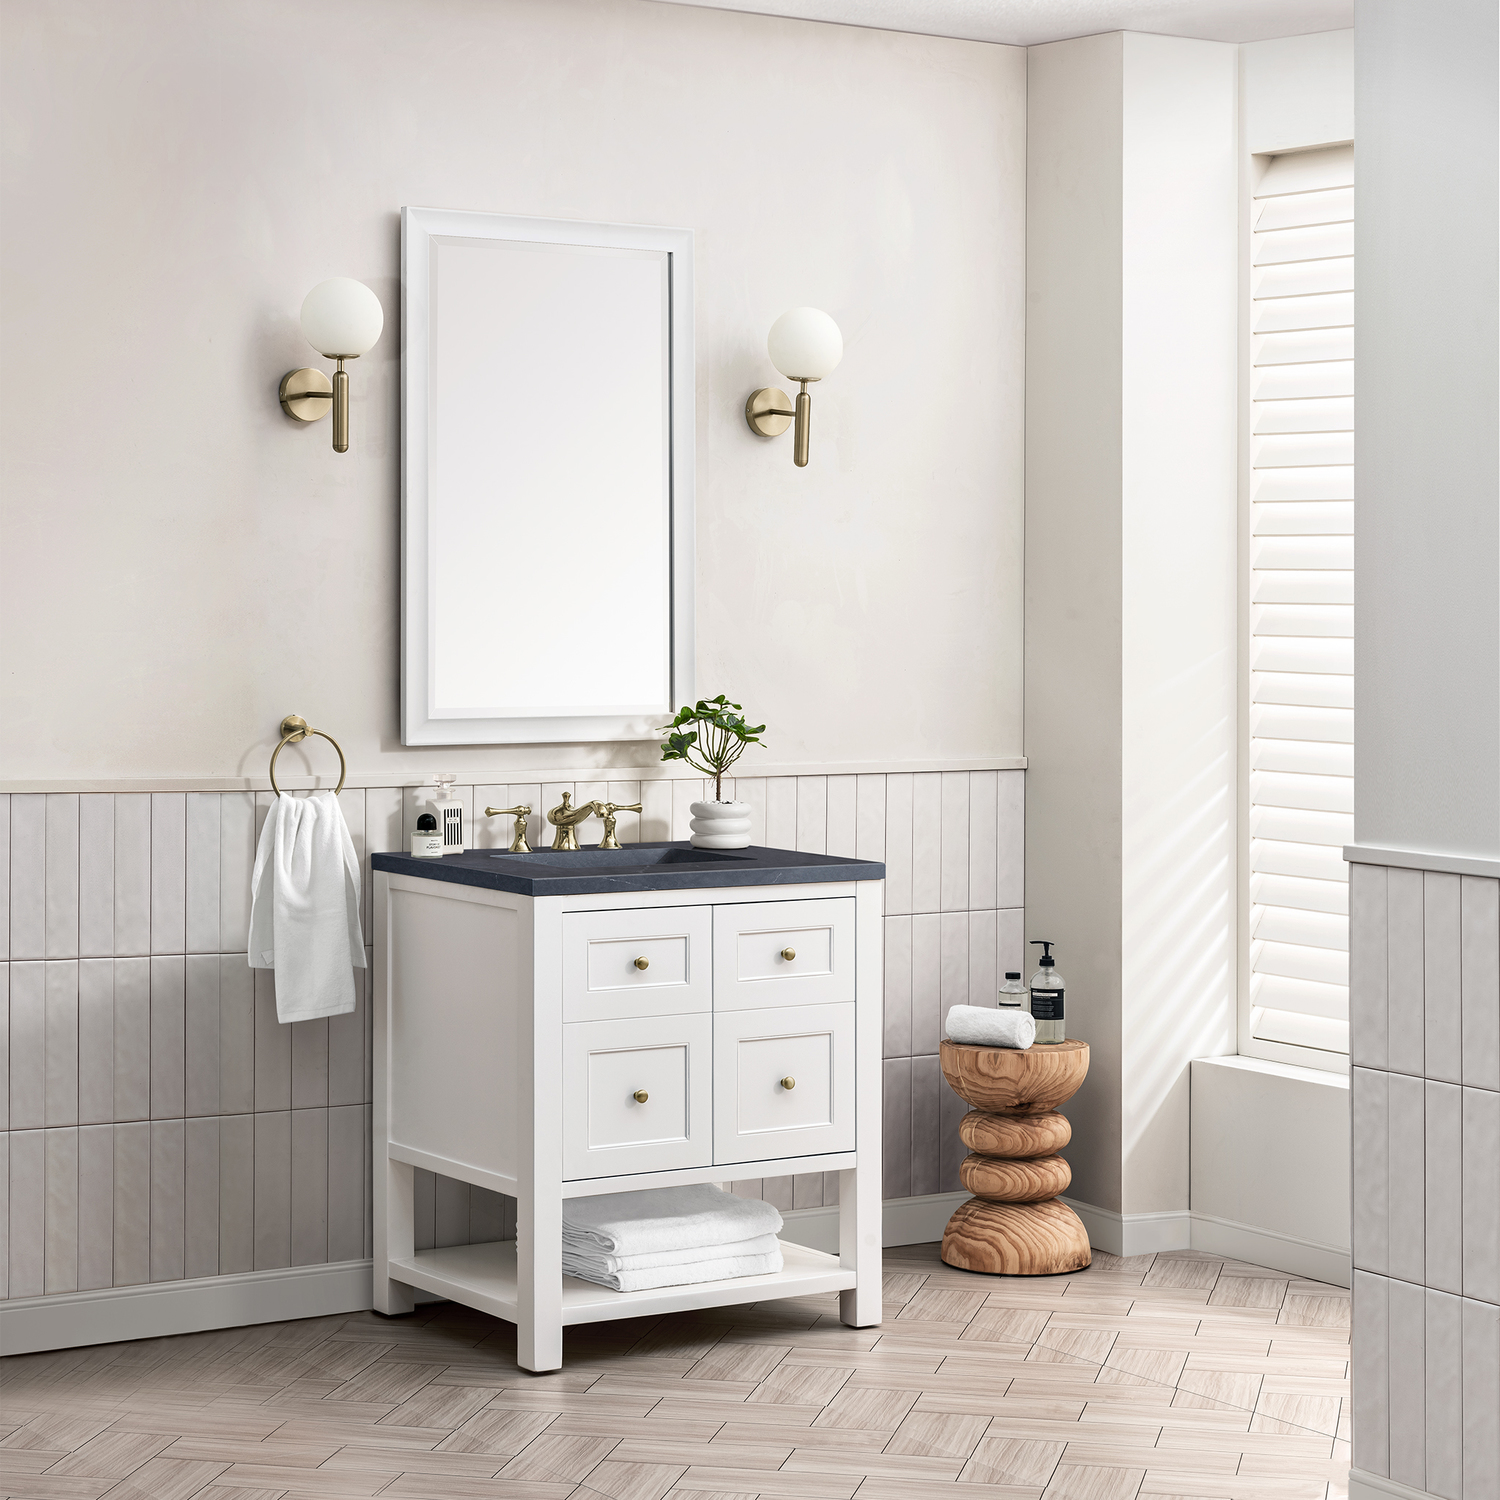 70 inch vanity top double sink James Martin Vanity Bright White Modern Farmhouse, Transitional